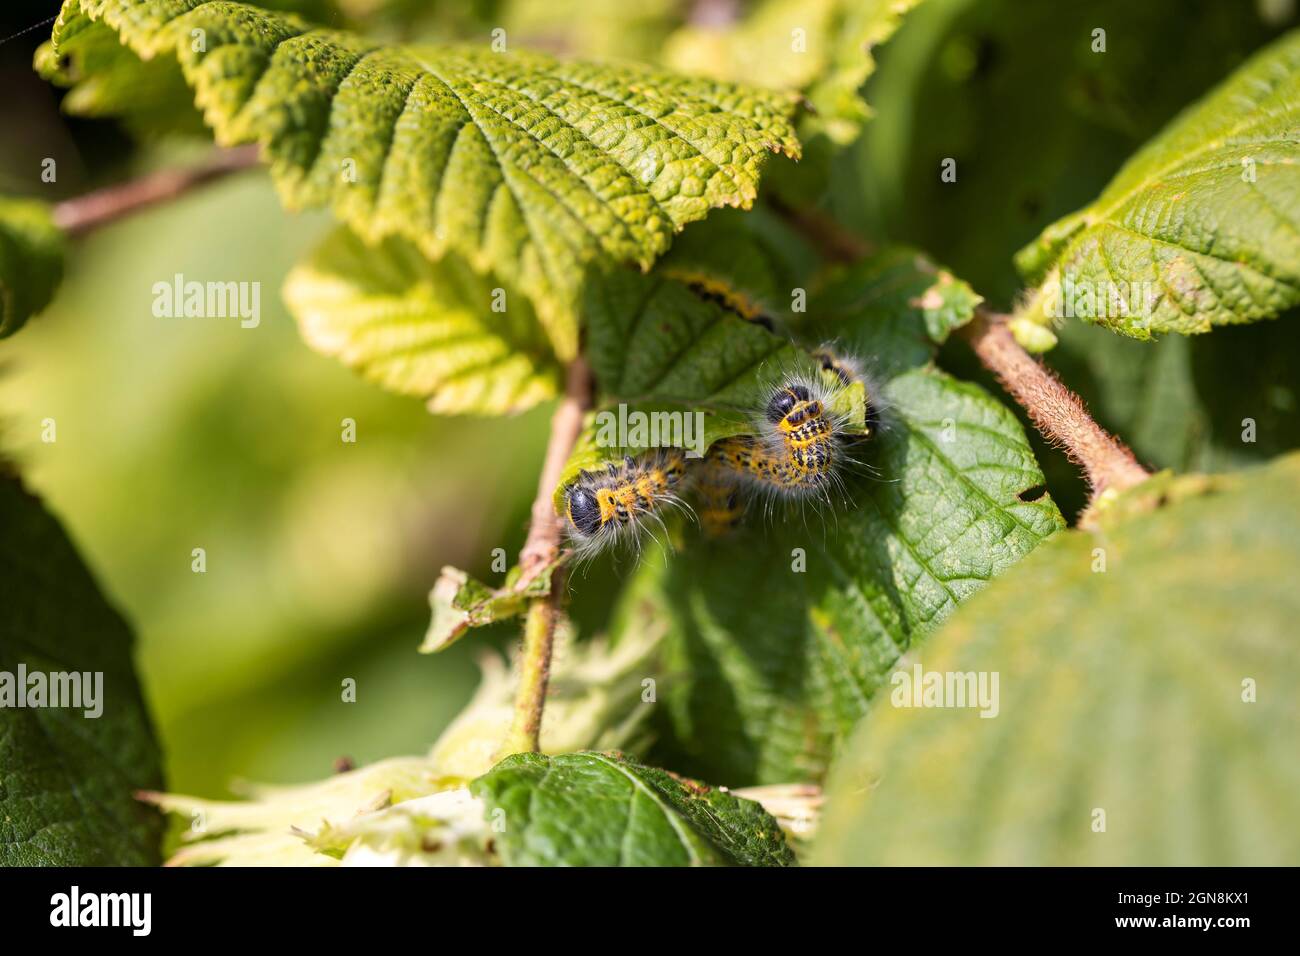 A group of buff-tip caterpillars sitting on a leaf of a hazelnut tree. The insect is also called a phalera bucephala and is yellow with black stripes Stock Photo